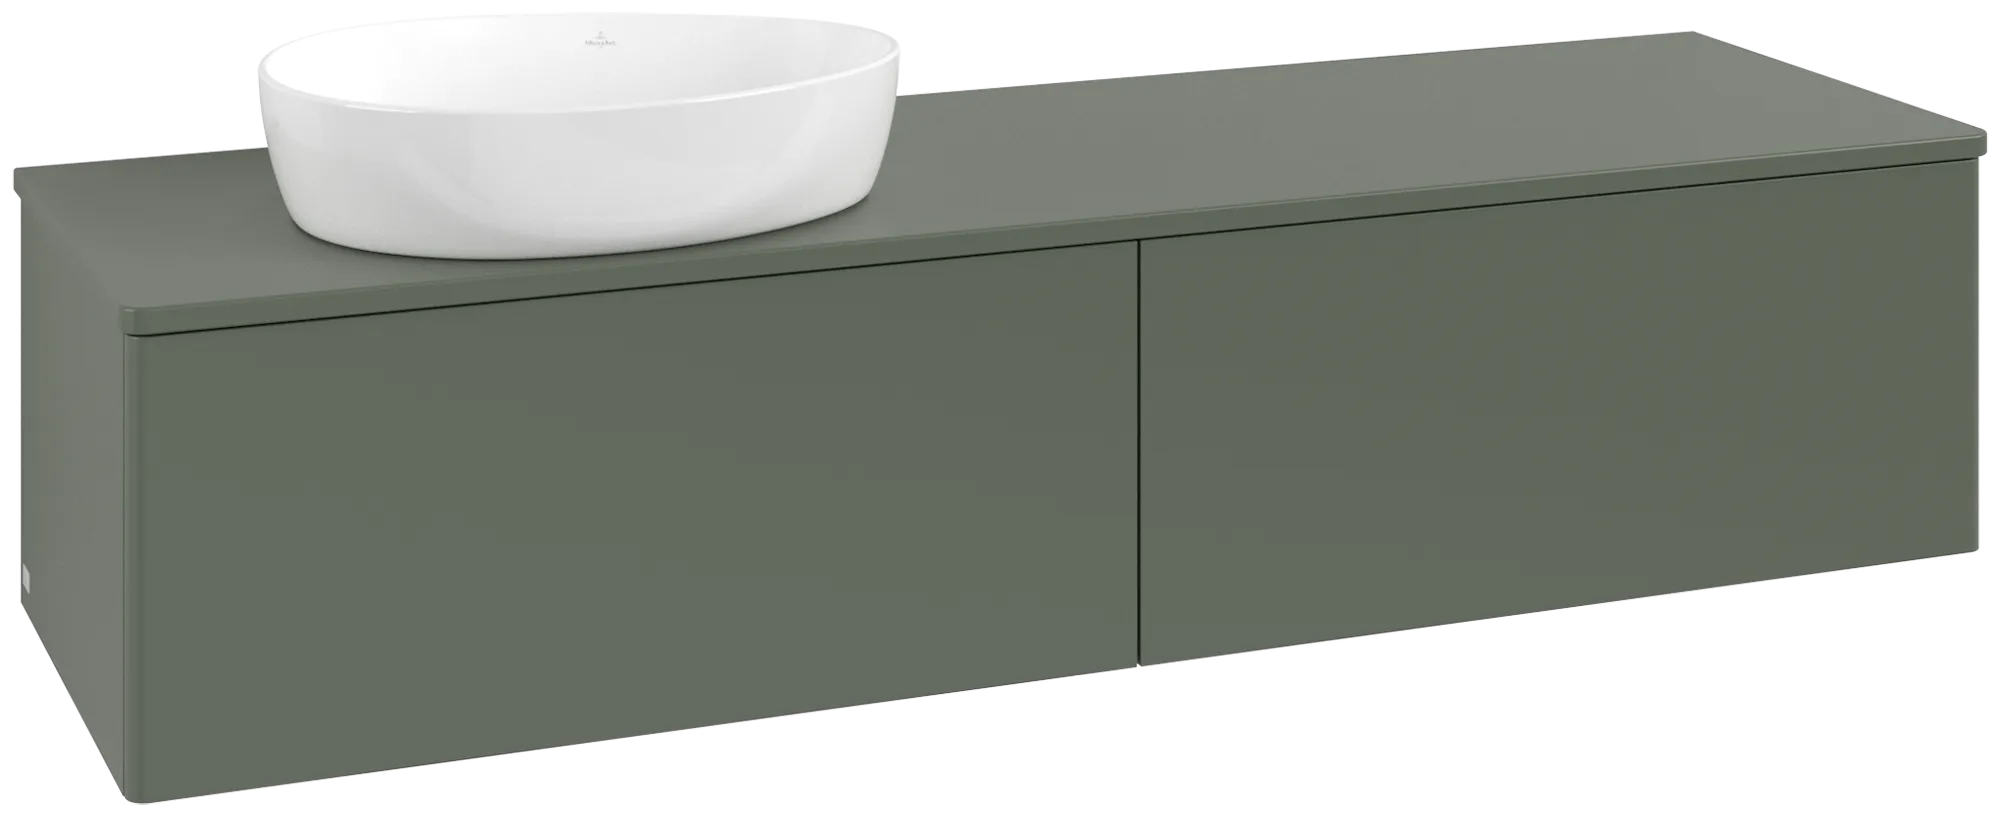 Зображення з  VILLEROY BOCH Antao Vanity unit, 2 pull-out compartments, 1600 x 360 x 500 mm, Front without structure, Leaf Green Matt Lacquer / Leaf Green Matt Lacquer #K37050HL